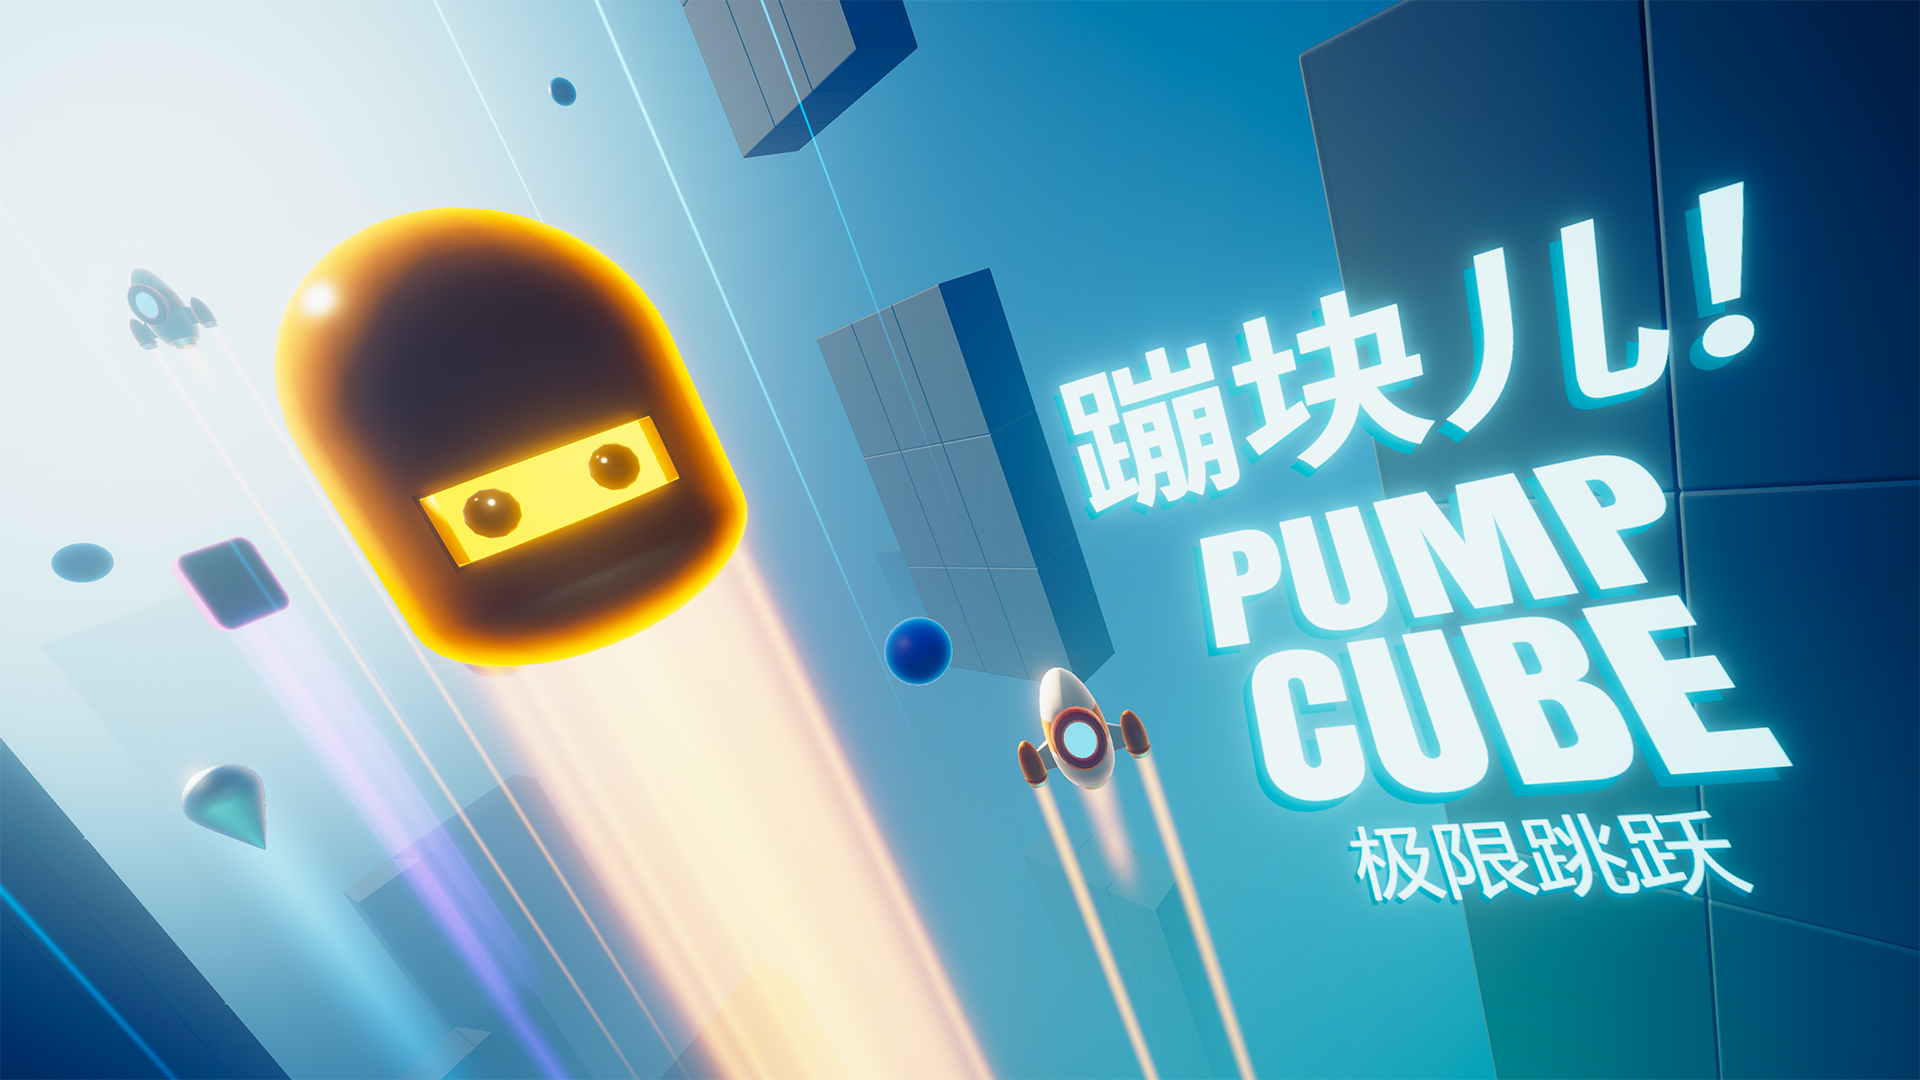 Banner of Pump Cube 